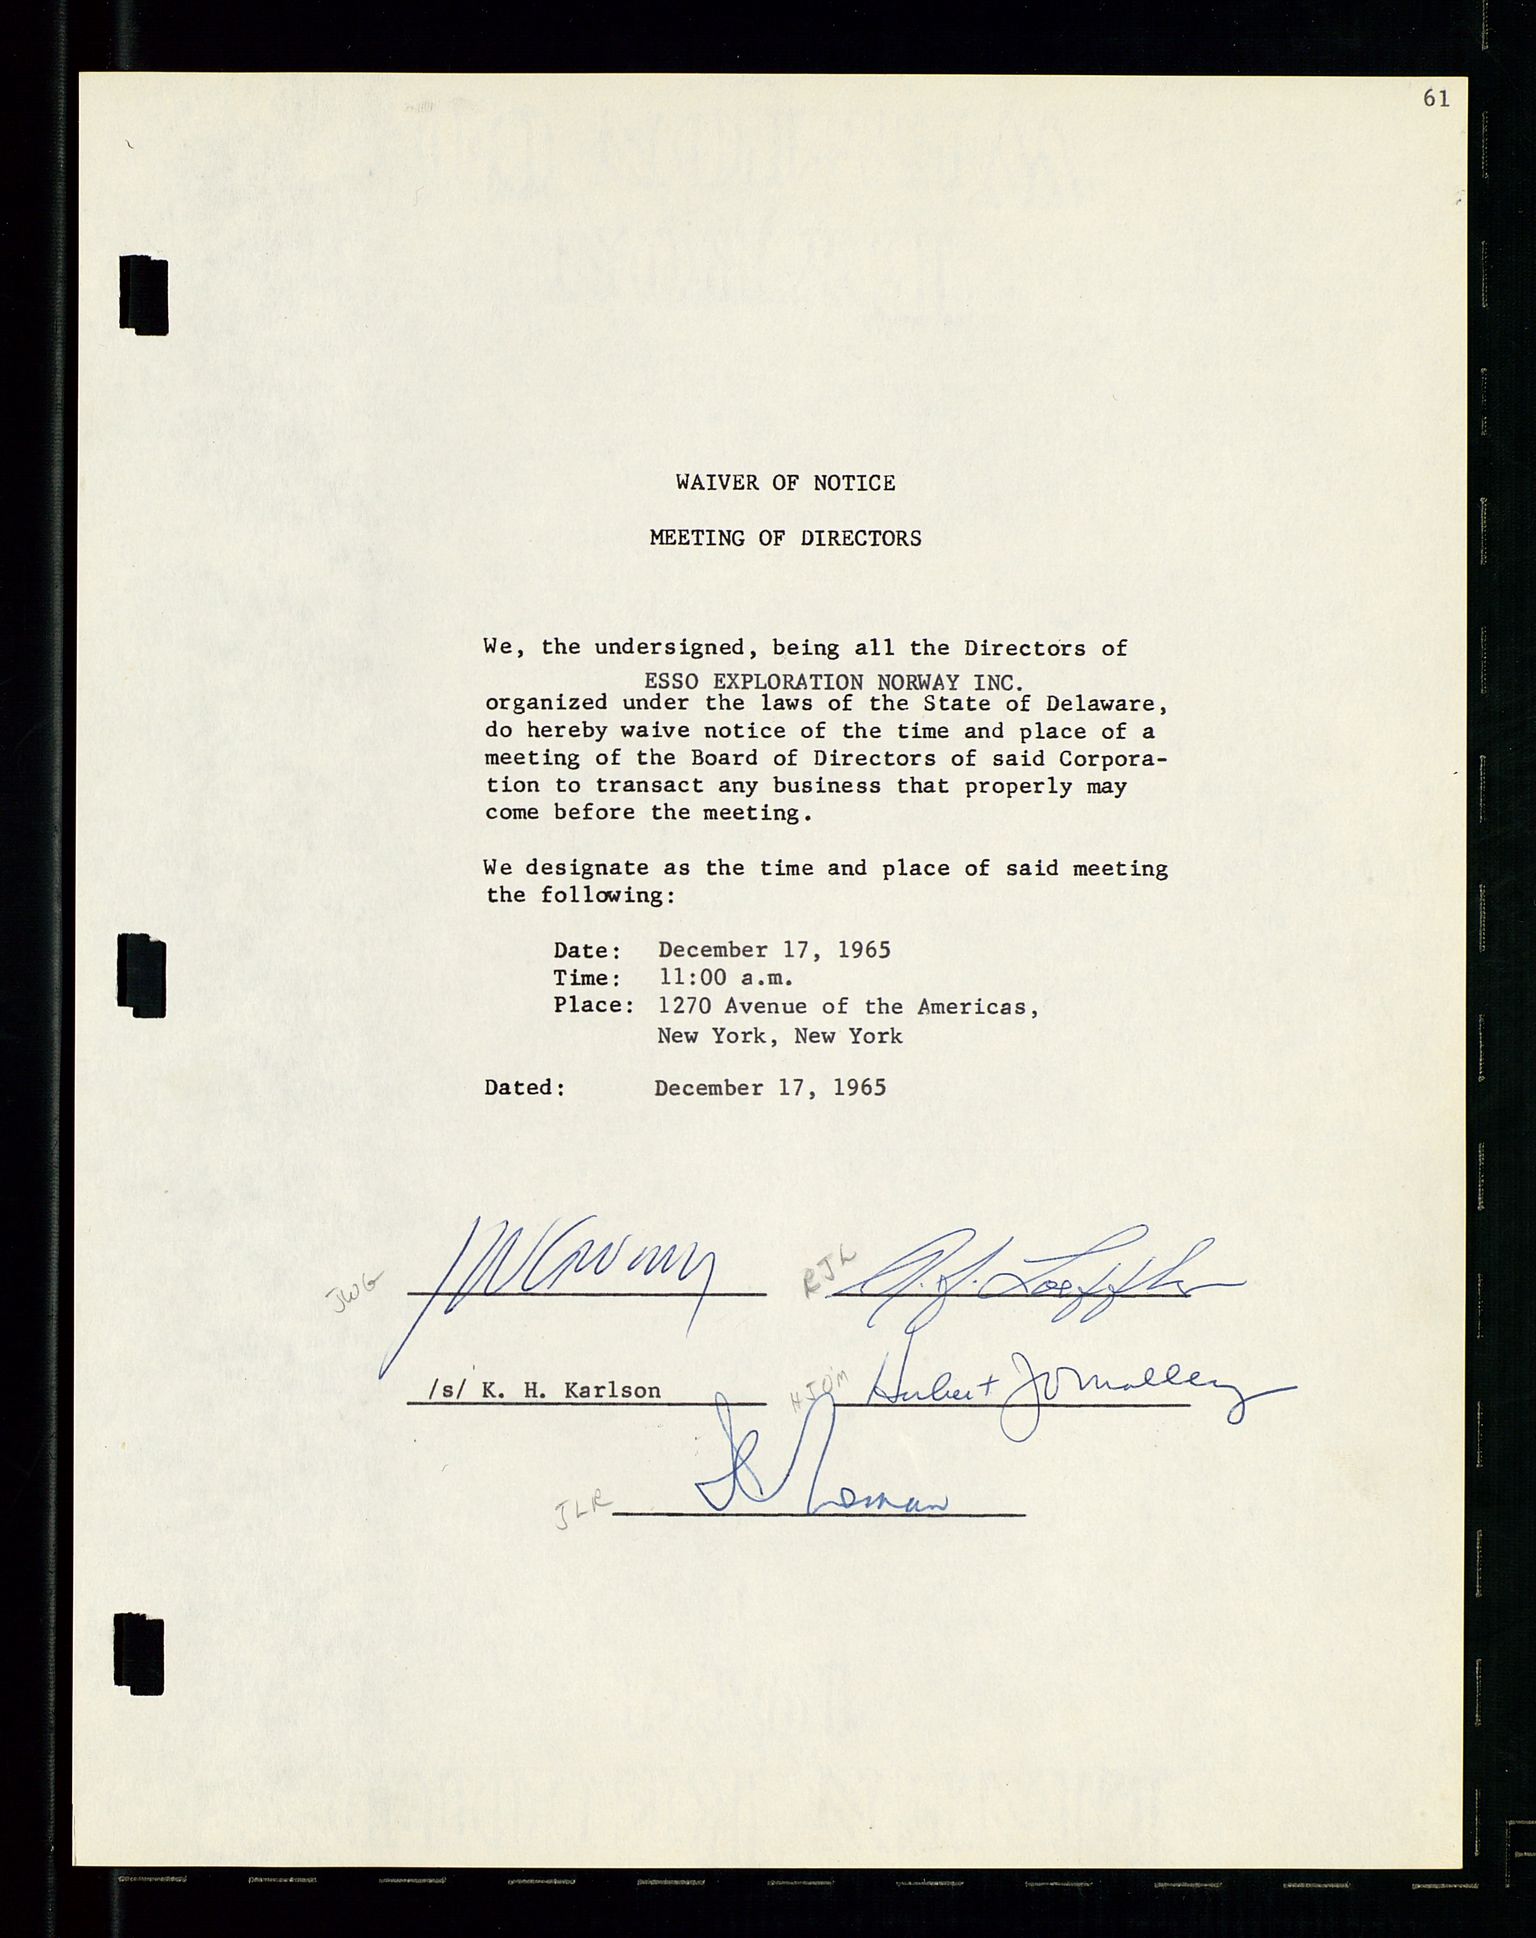 Pa 1512 - Esso Exploration and Production Norway Inc., SAST/A-101917/A/Aa/L0001/0001: Styredokumenter / Corporate records, By-Laws, Board meeting minutes, Incorporations, 1965-1975, s. 61